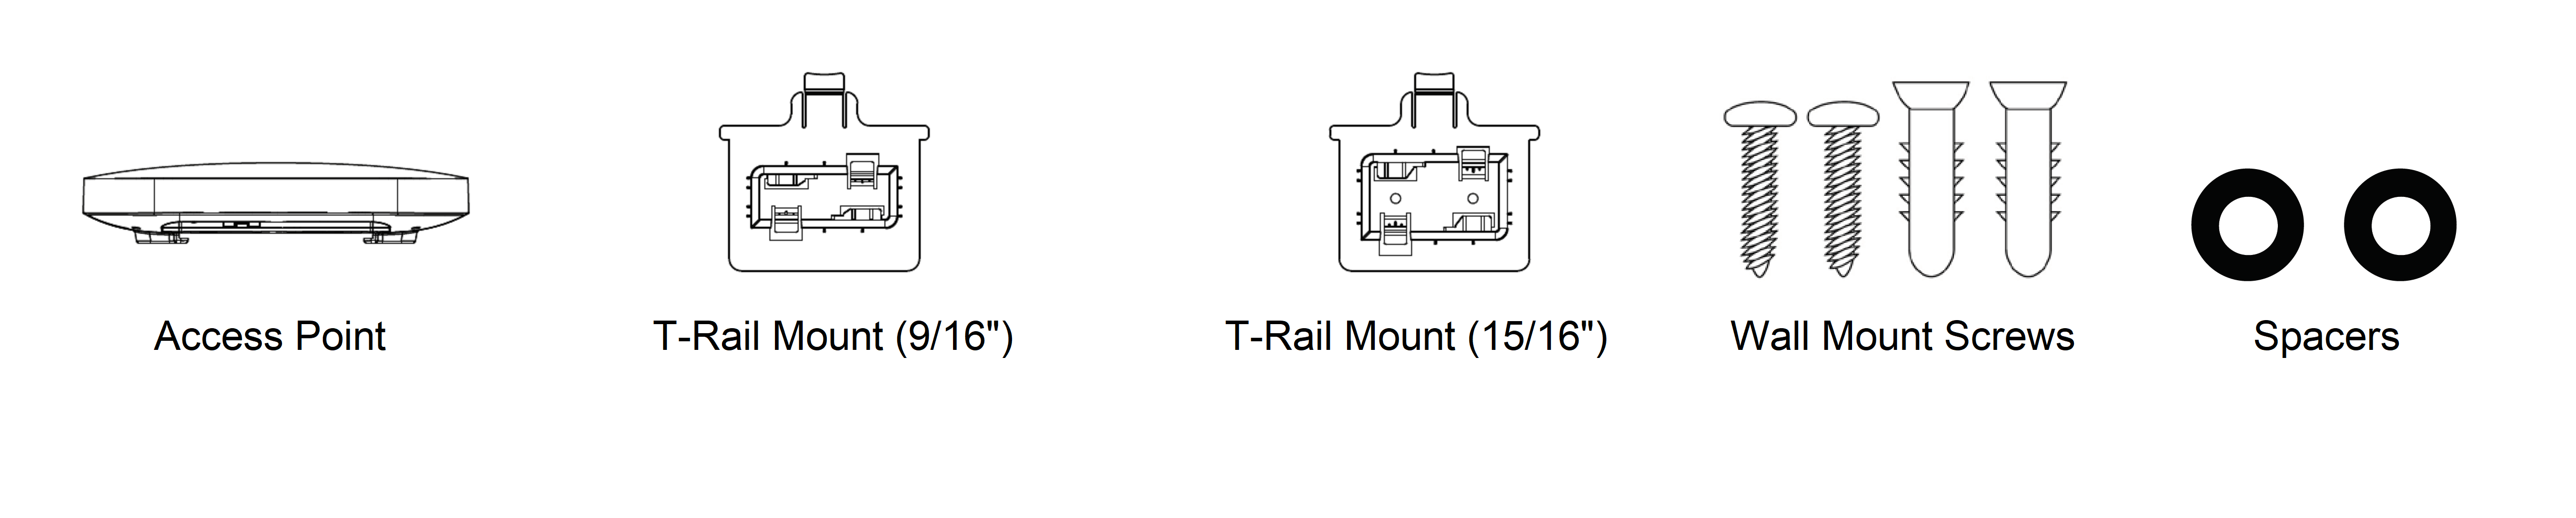 Diagram of the AP330 mounting parts list